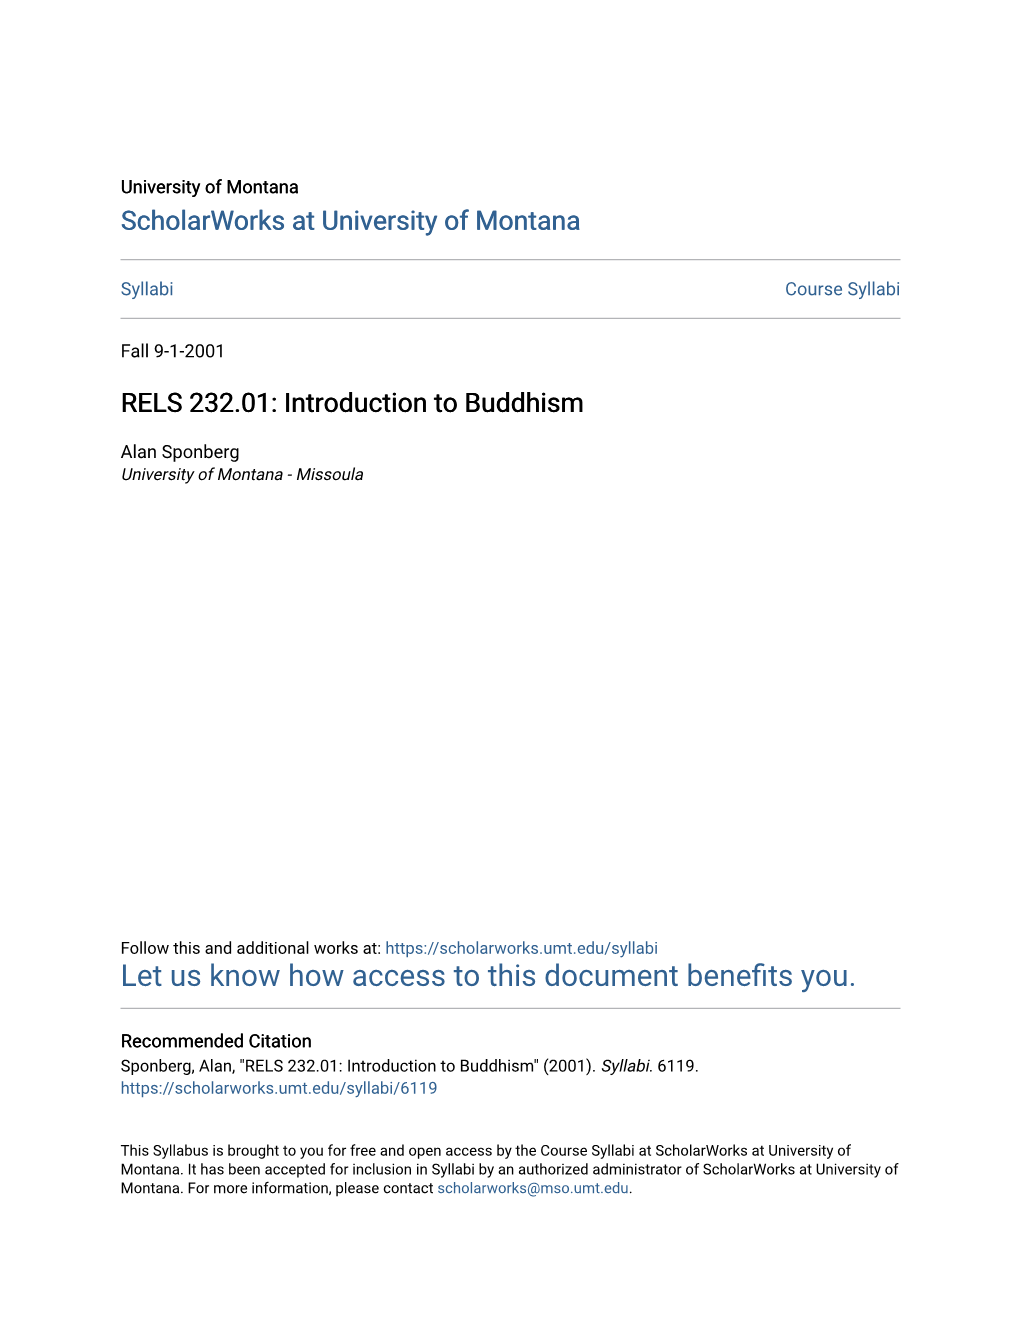 RELS 232.01: Introduction to Buddhism